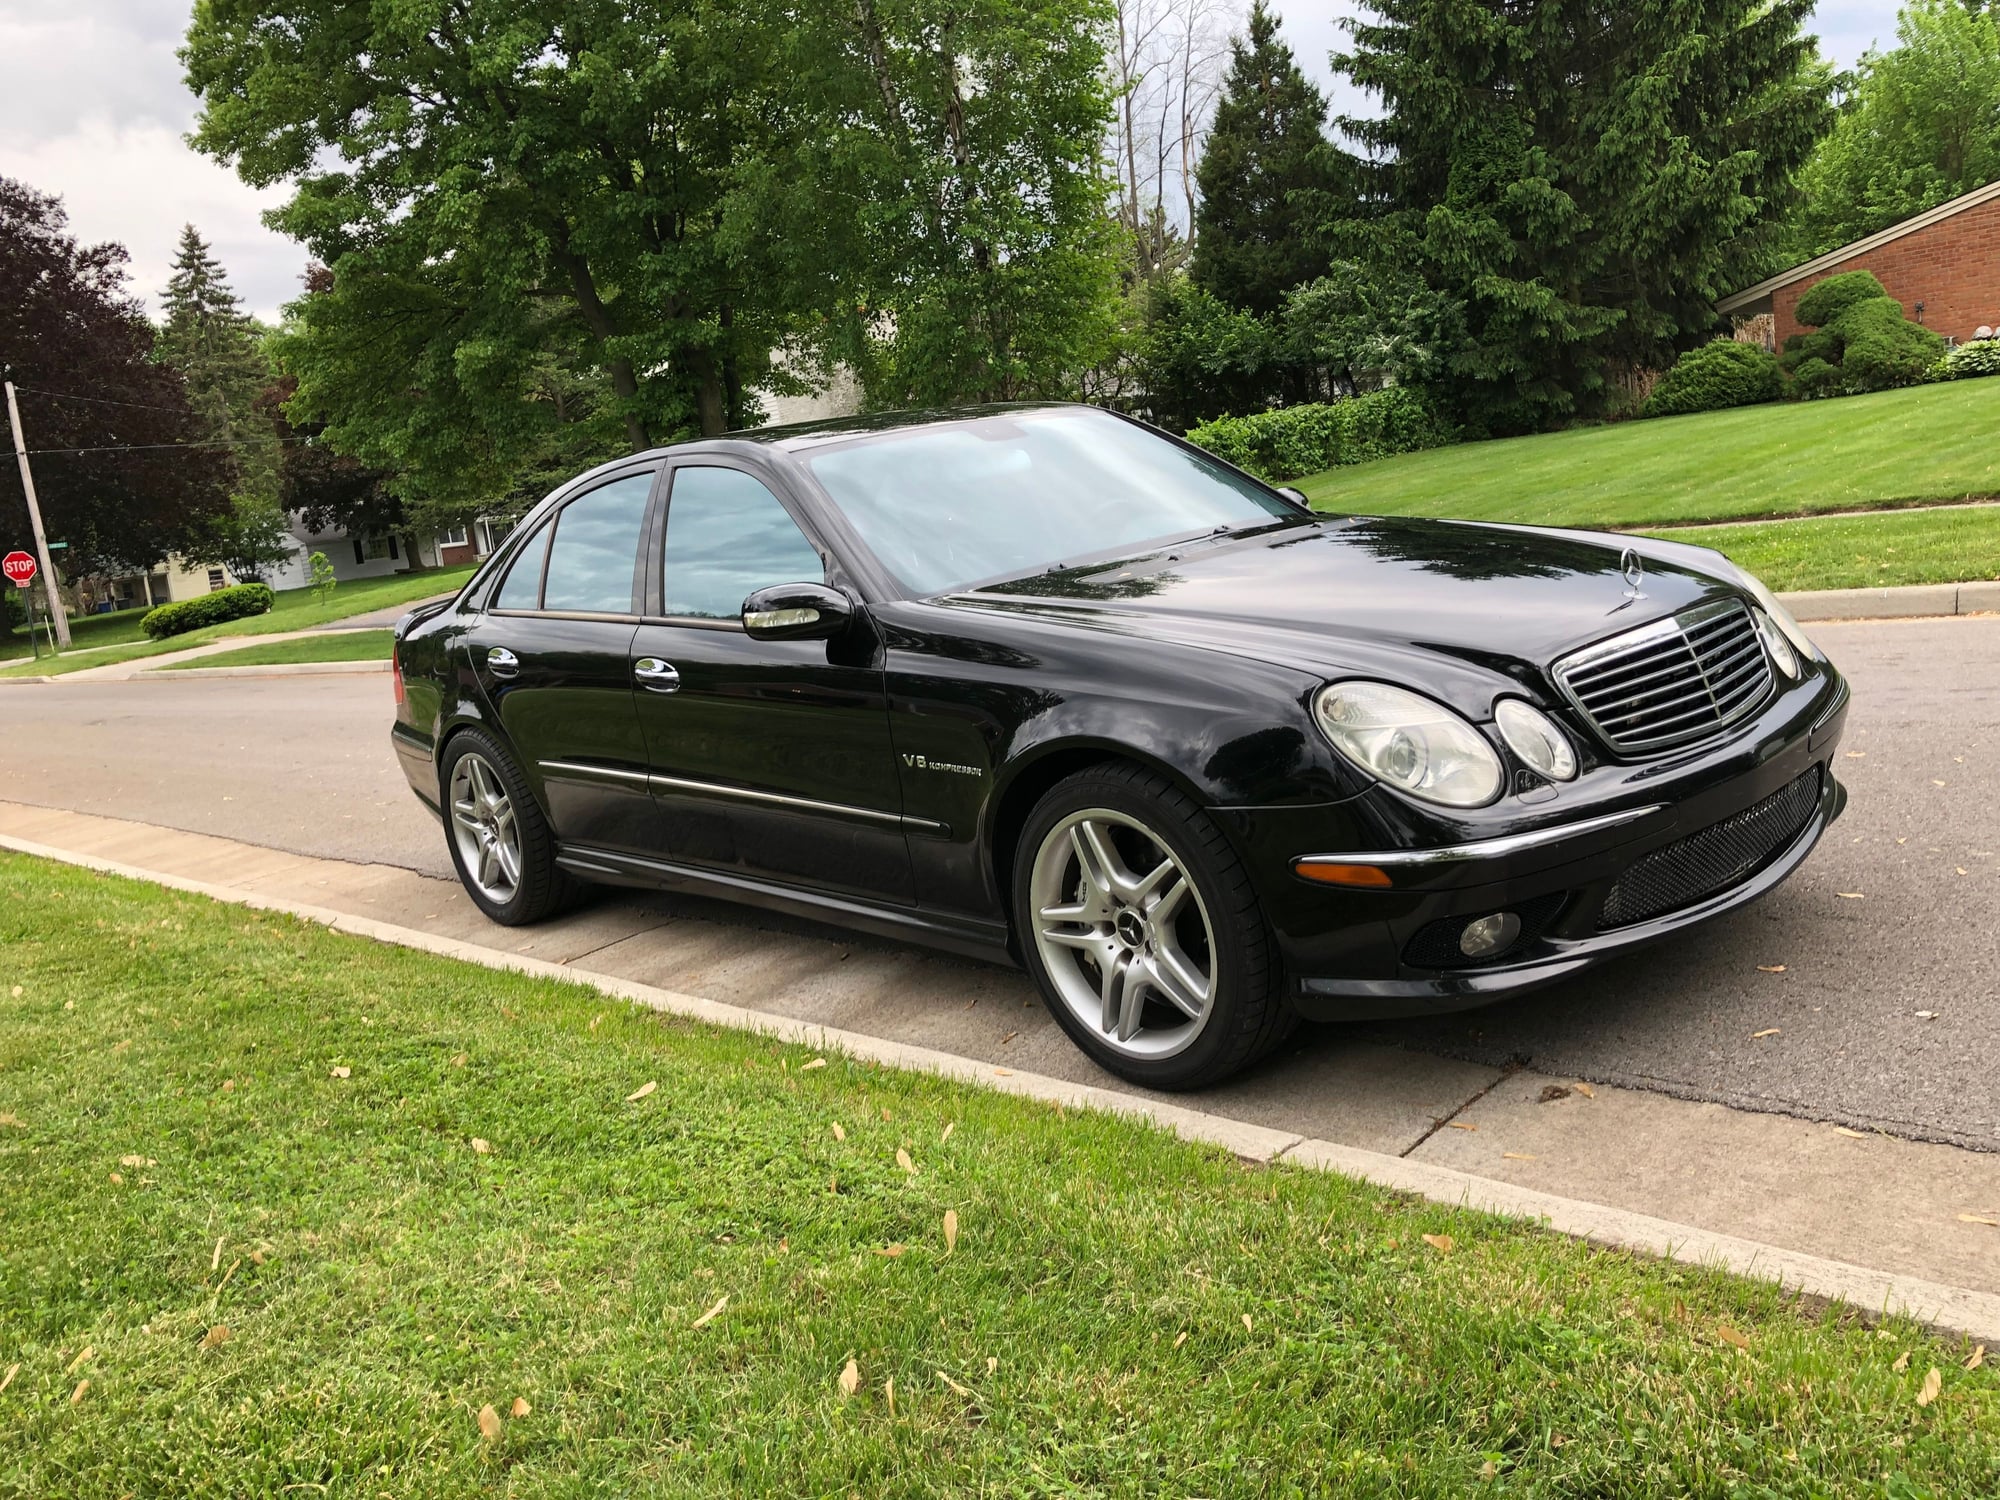 2004 Mercedes-Benz E55 AMG - 04' E55 NEED GONE ASAP!!! - Used - VIN WDBUF76J24A541445 - 8 cyl - 2WD - Automatic - Sedan - Black - Toledo, OH 43613, United States